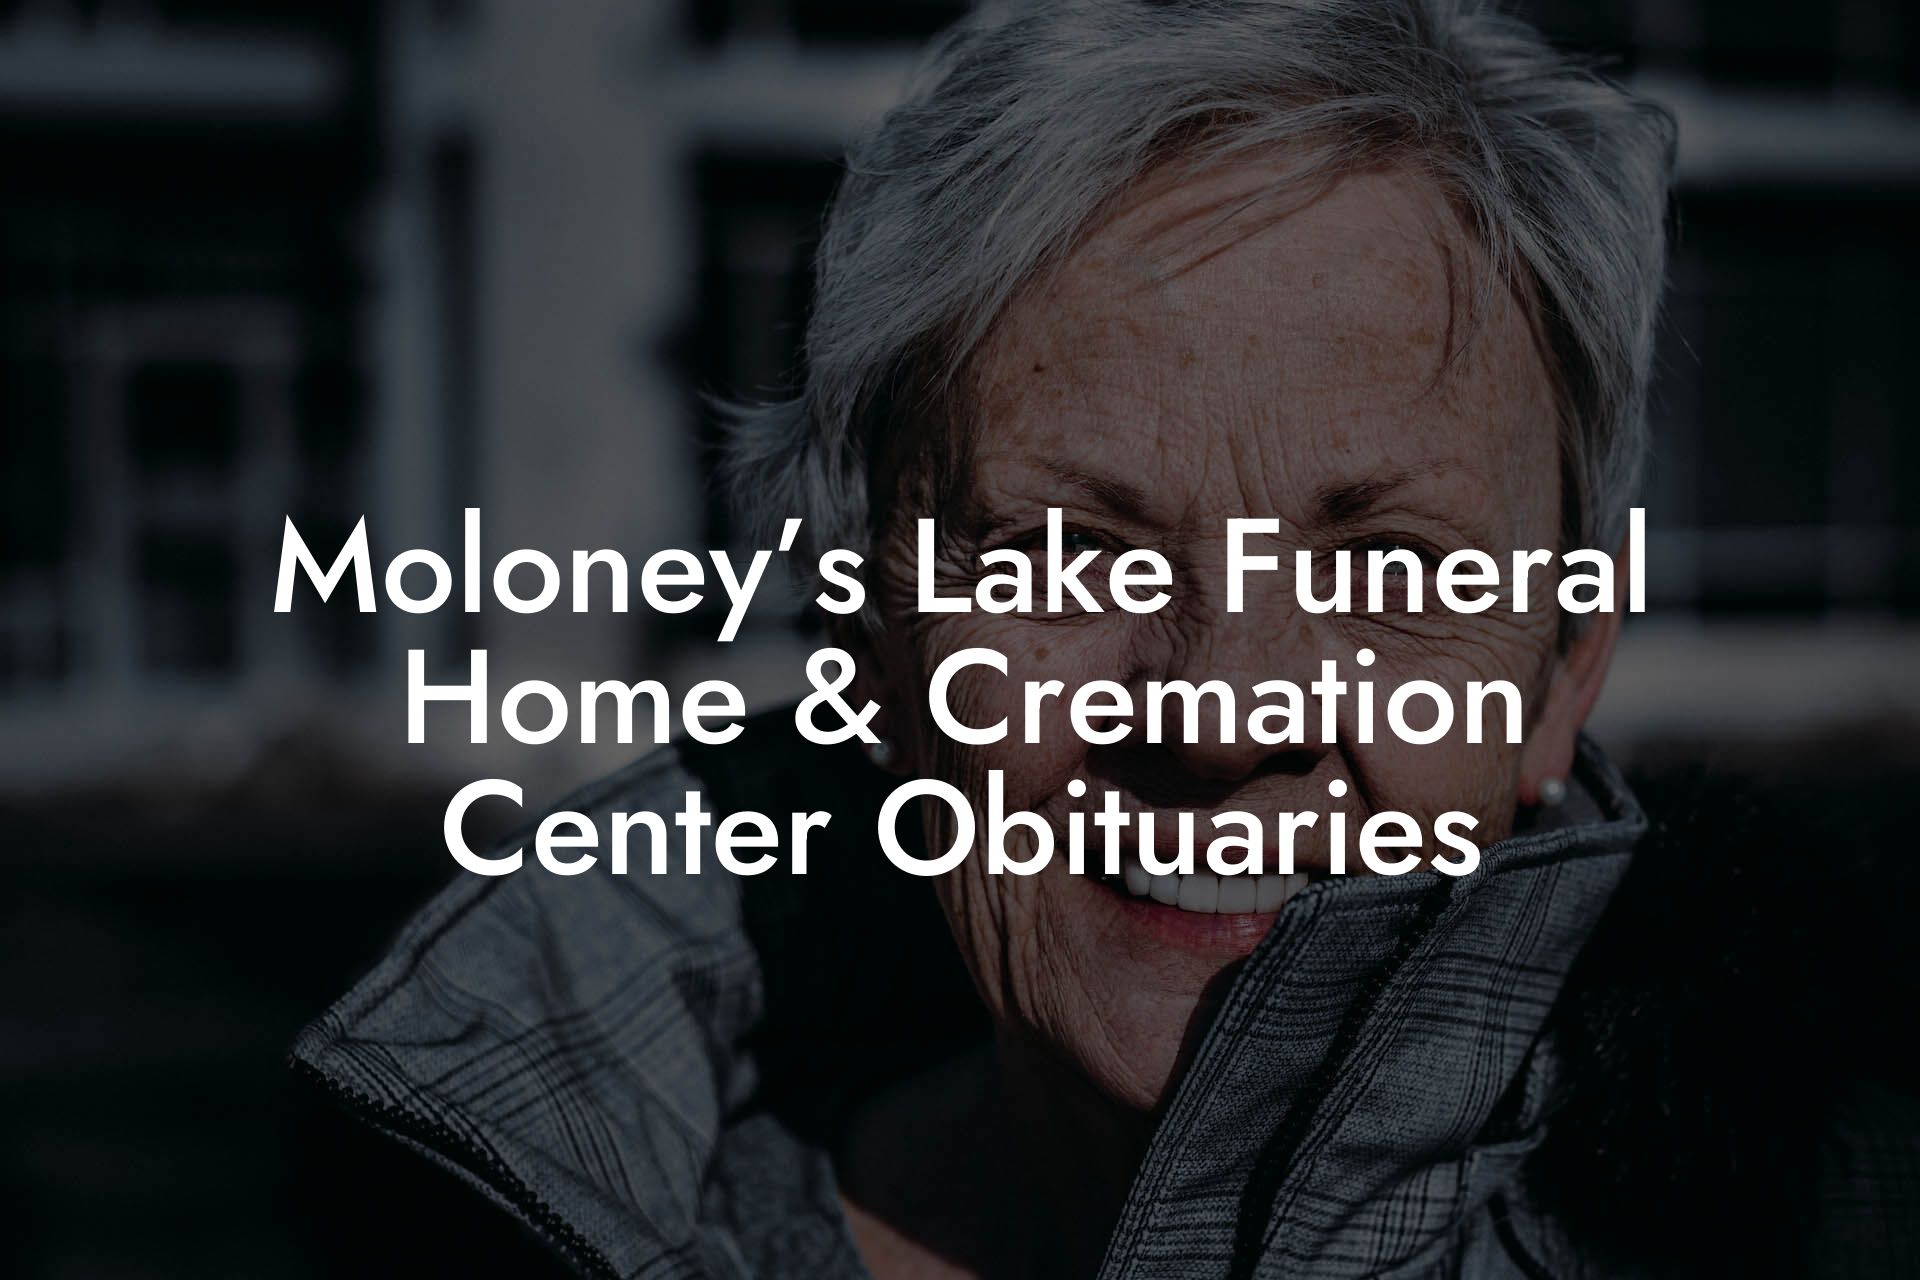 Moloney’s Lake Funeral Home & Cremation Center Obituaries